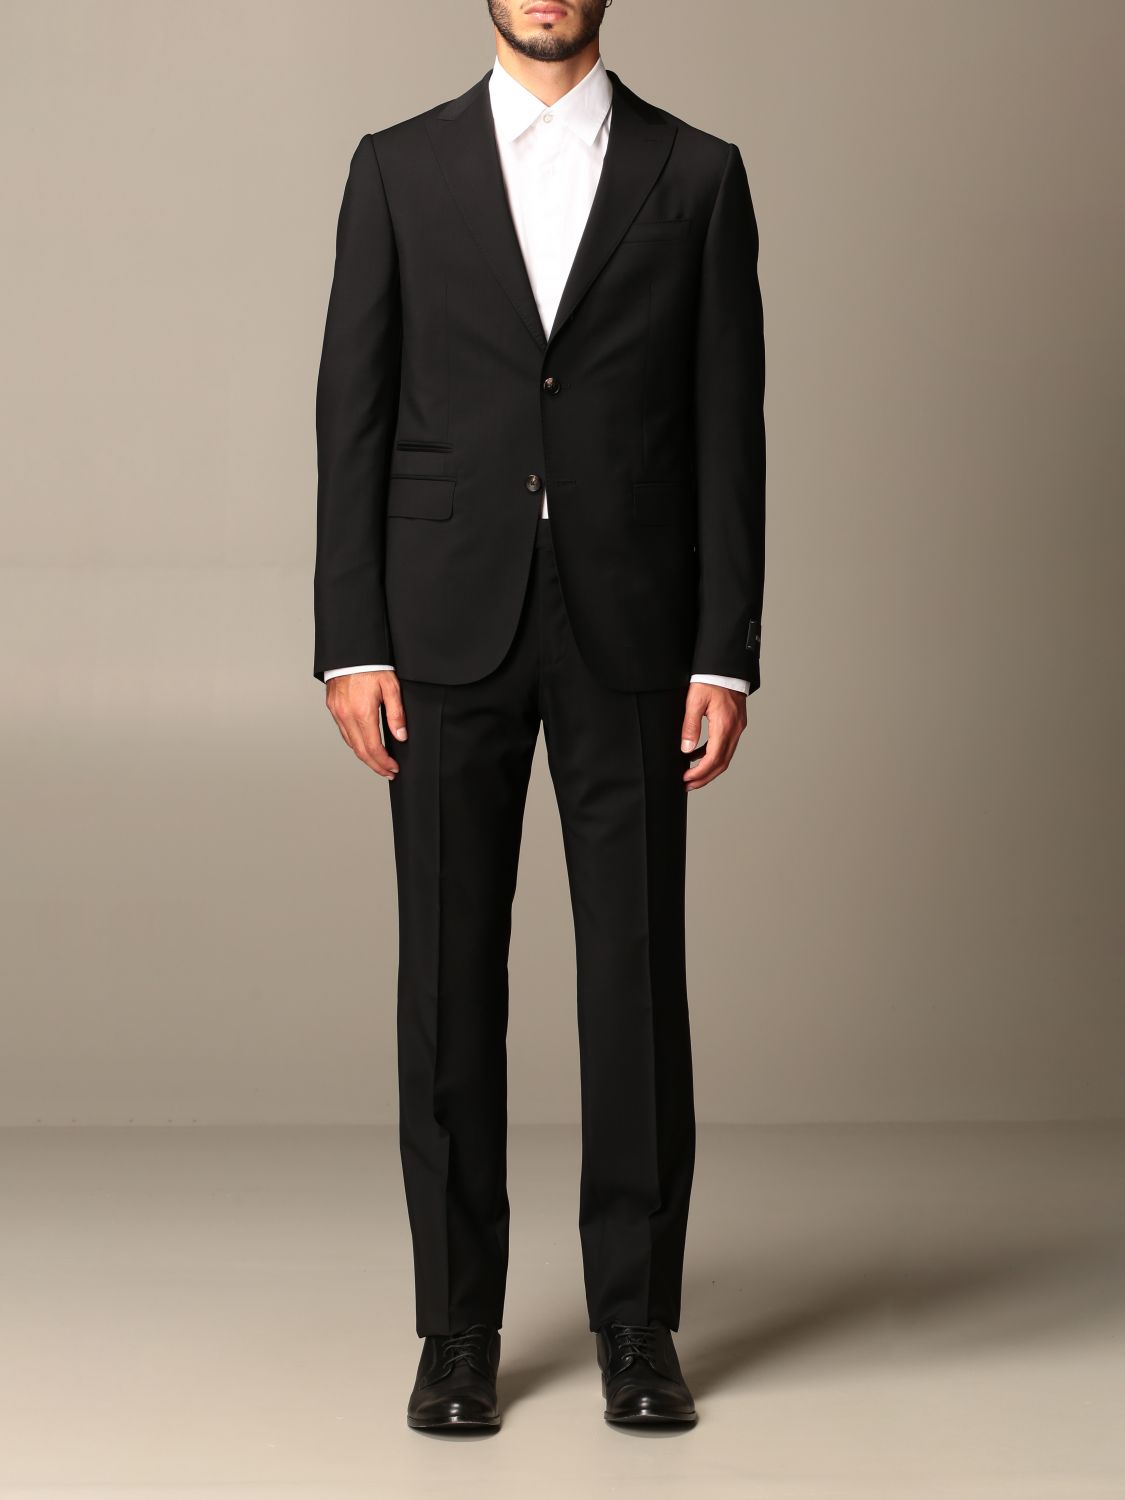 Z Zegna Outlet: single-breasted suit in mohair wool 180 gr drop 8 ...